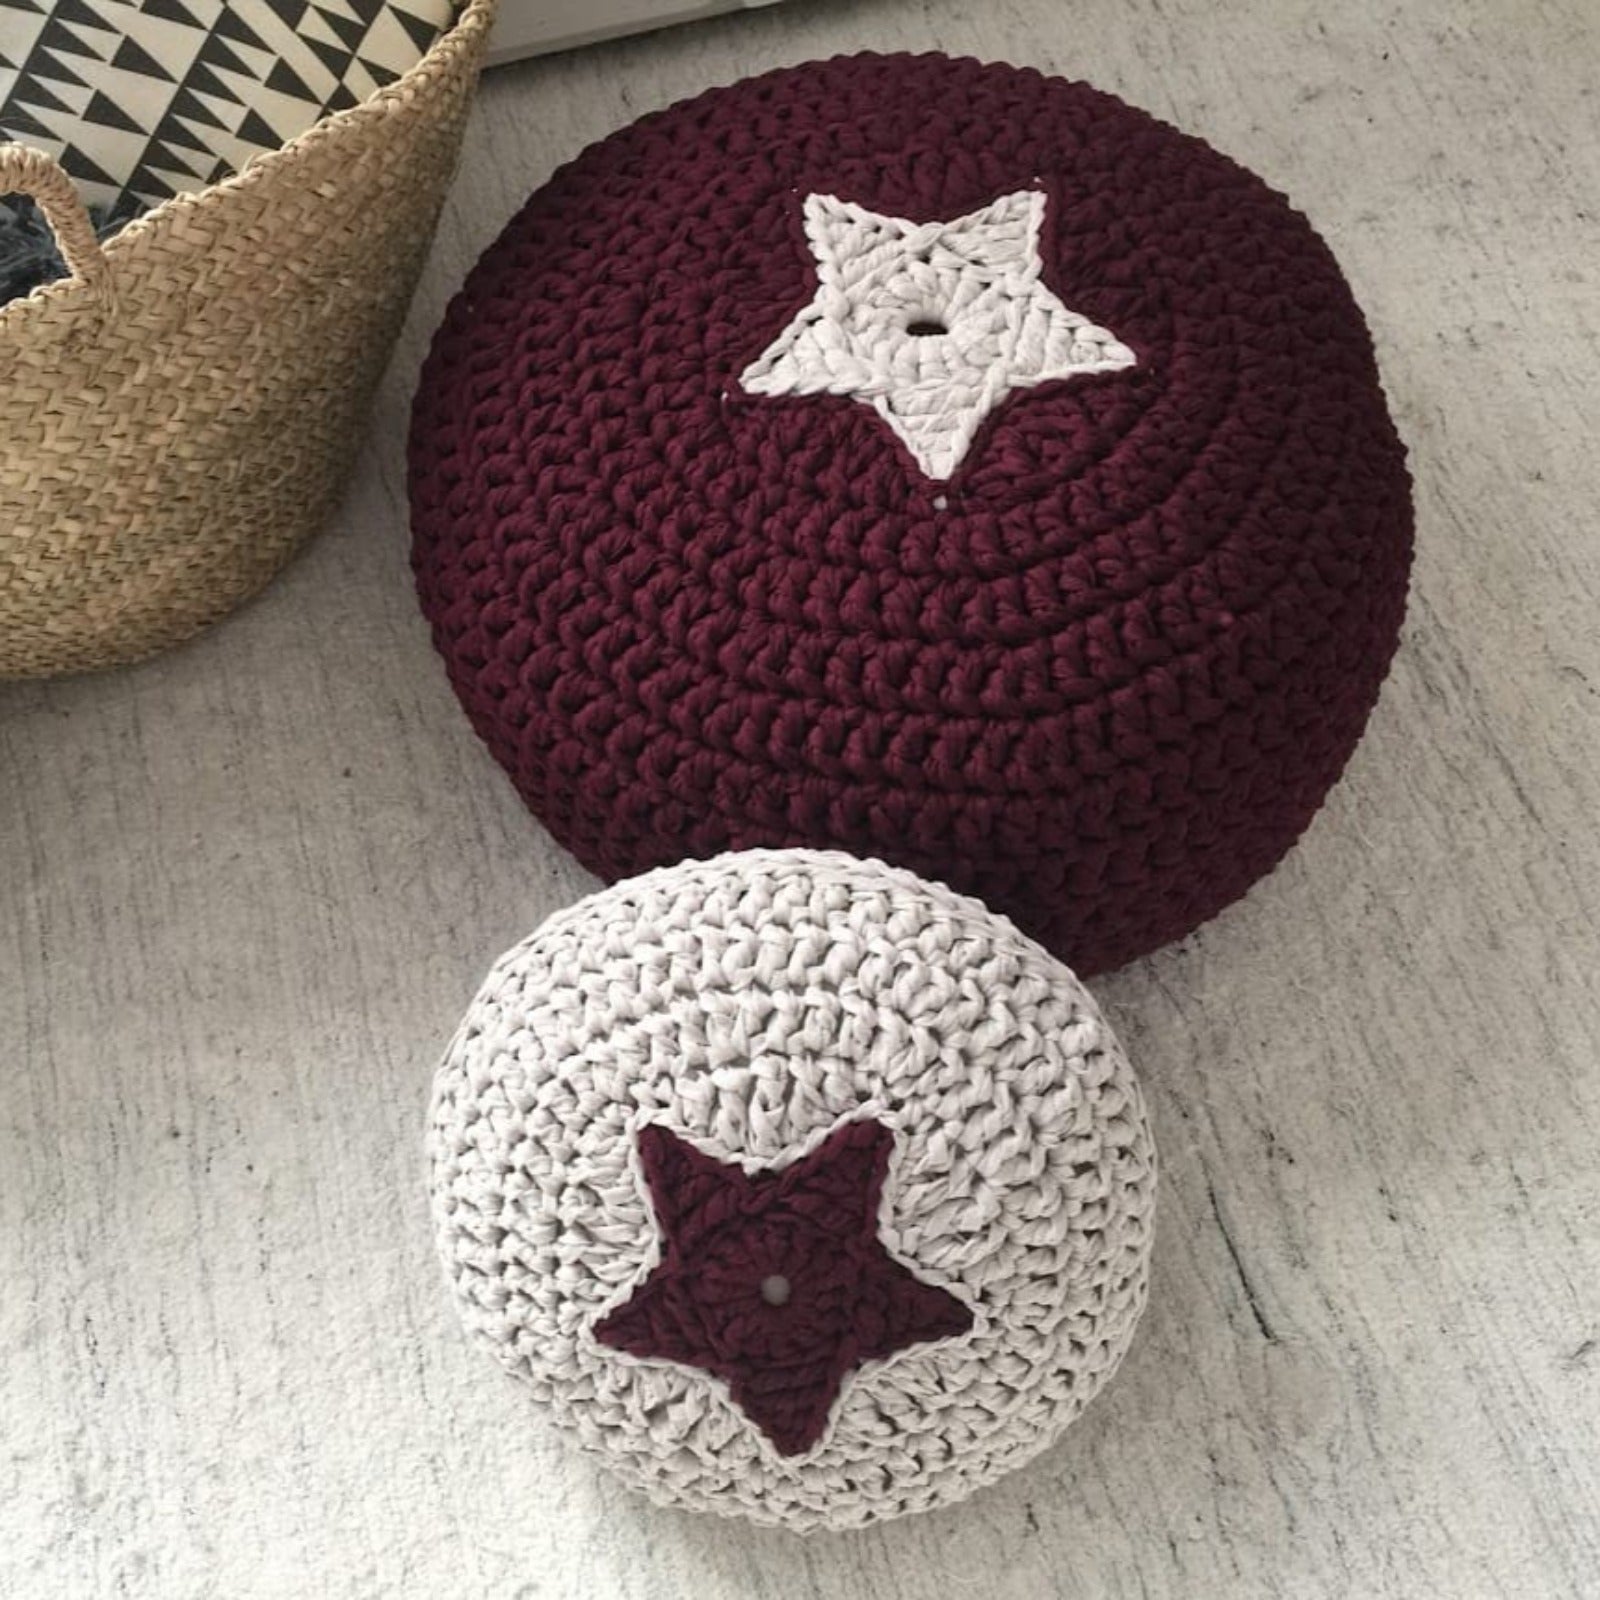 Round Crochet Pillow | Royal Blue with White Star Design - Looping Home